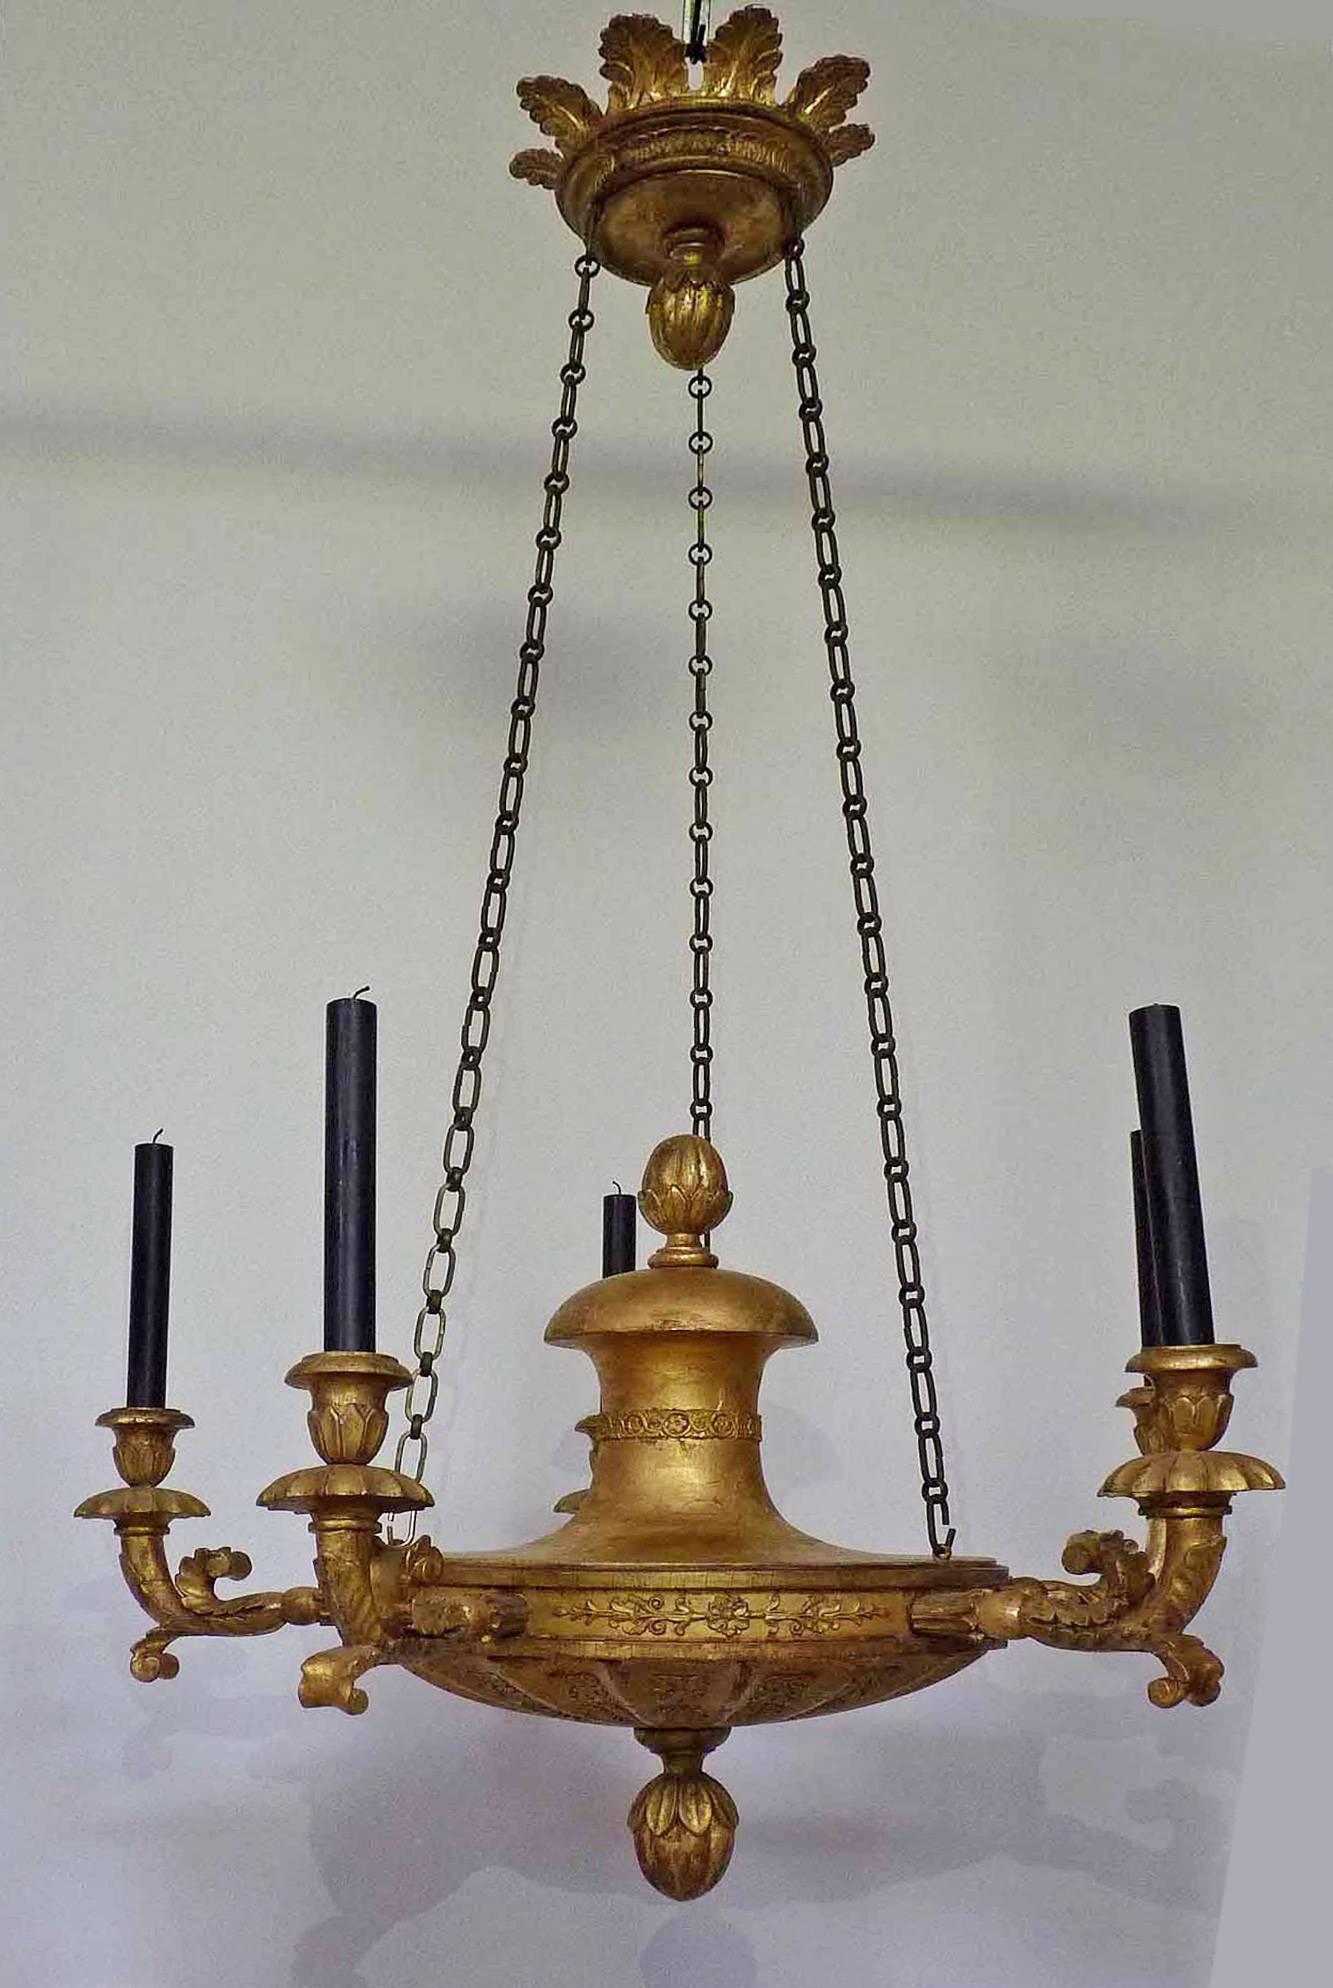 Five armed Ceiling lamp, Hand carved wood, leaf gilt, Germany c.1820 - Other Art Style Art by Unknown